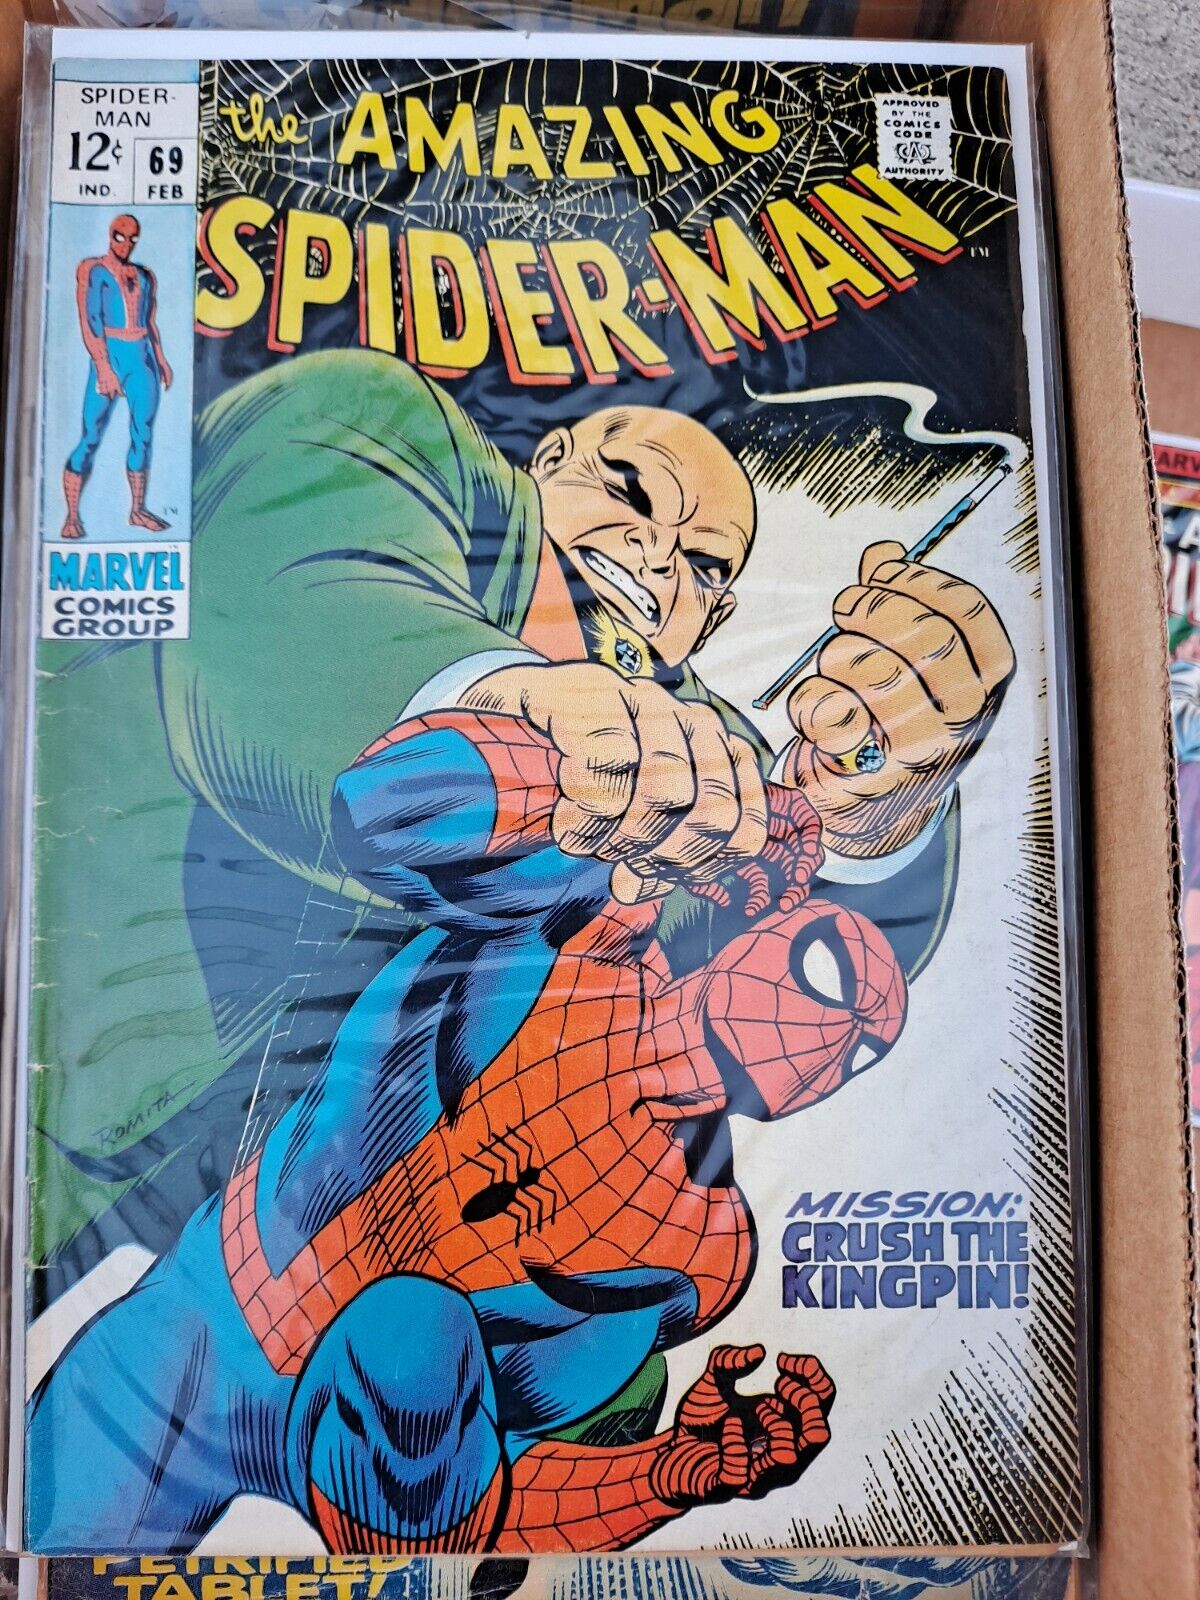 Amazing Spiderman #69 Vintage Kingpin classic cover 🔥 Early Kingpin Wilson fisk